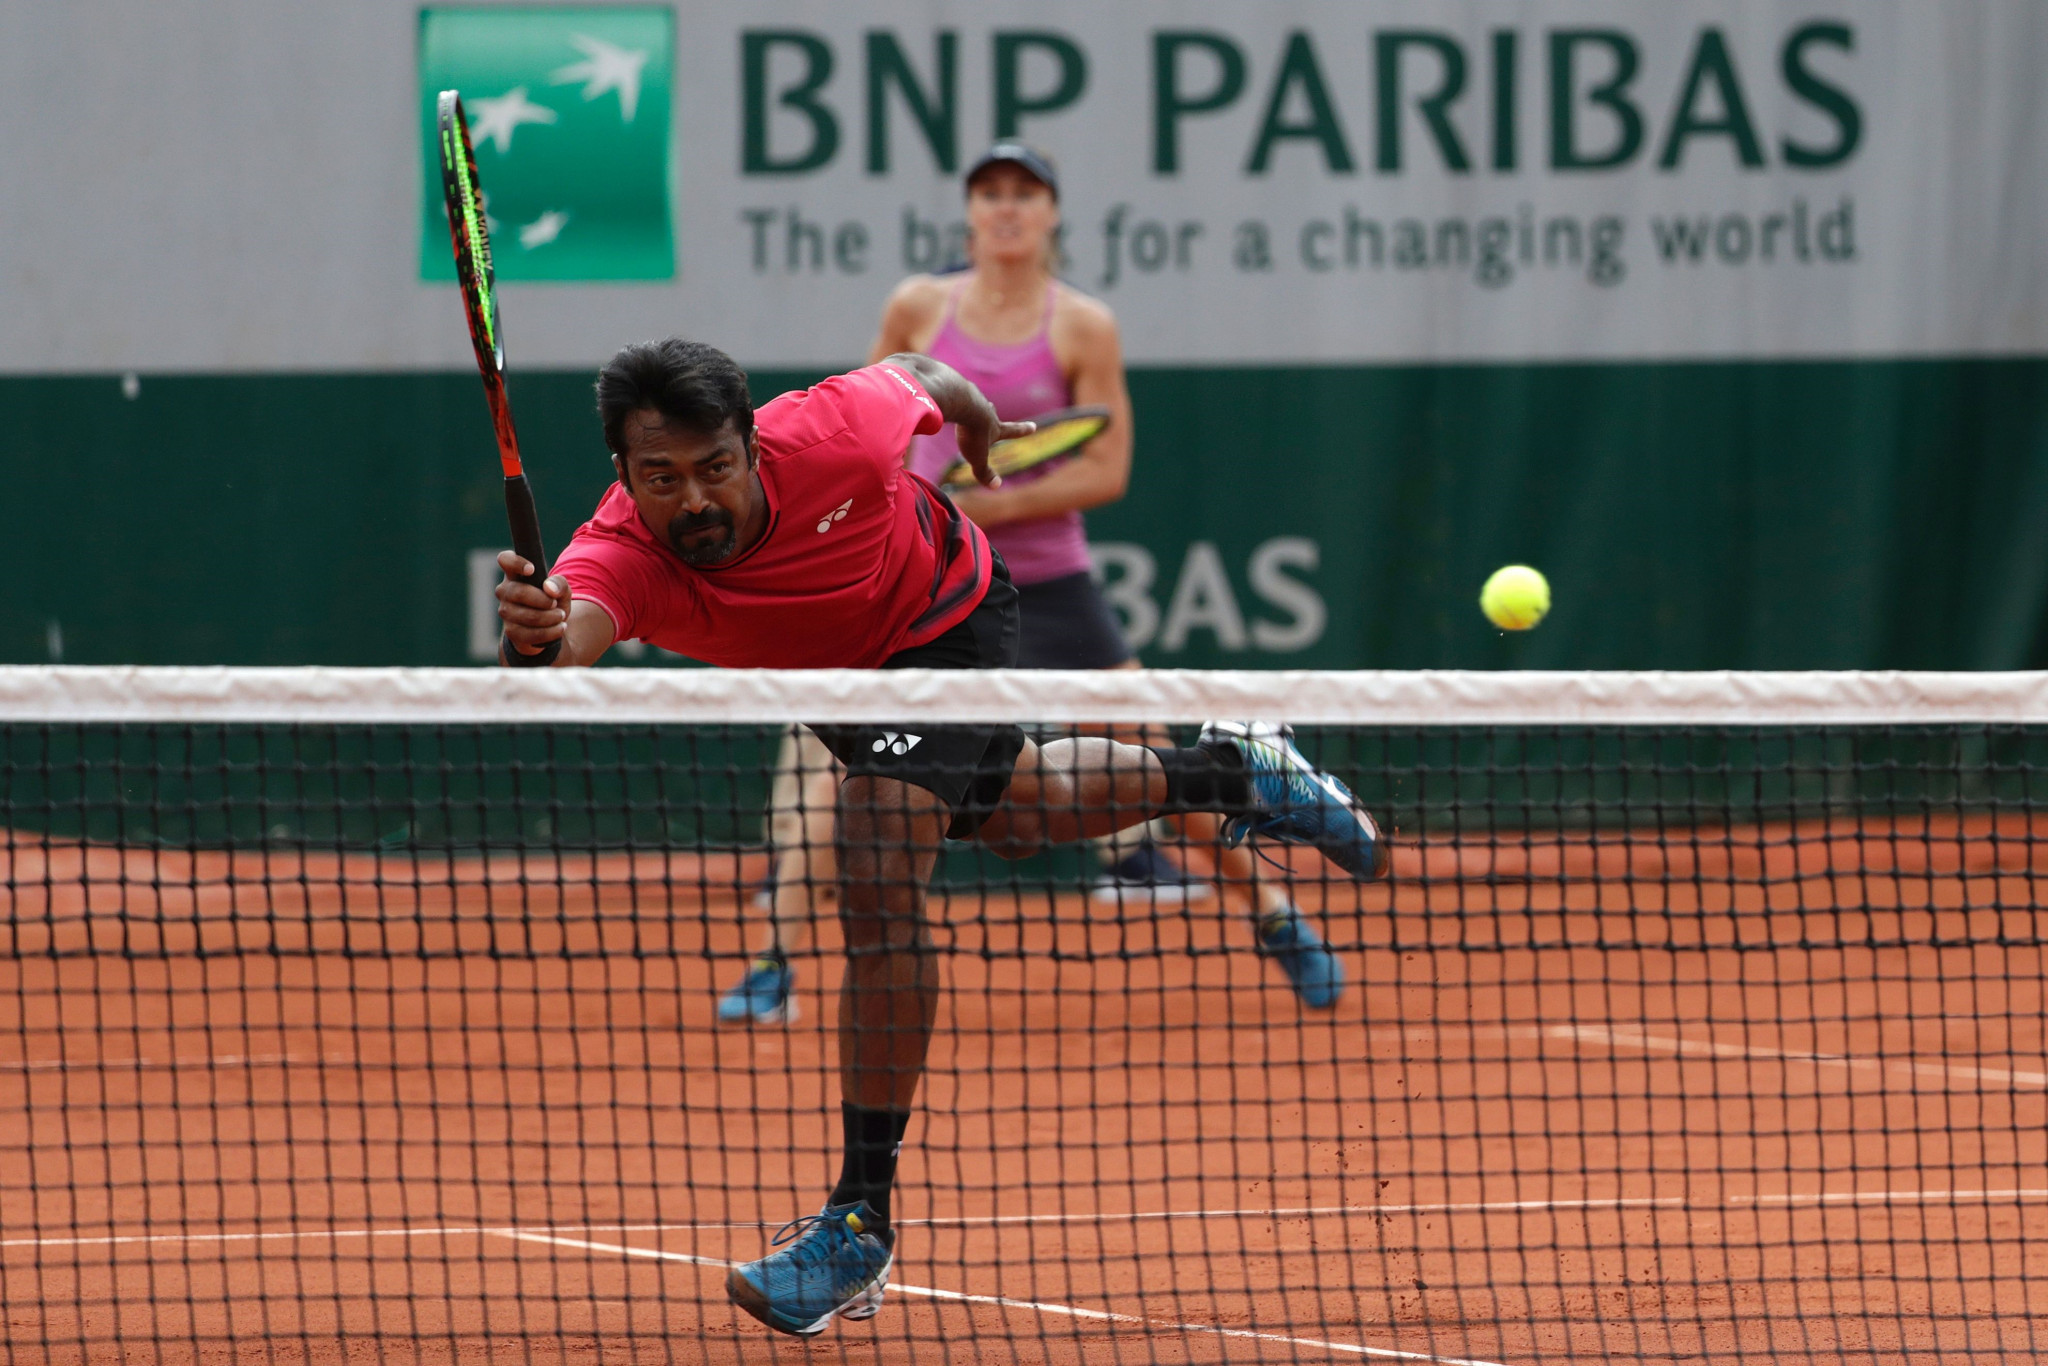 Indian tennis star Leander among athletes and coaches to pull out of 2018 Asian Games